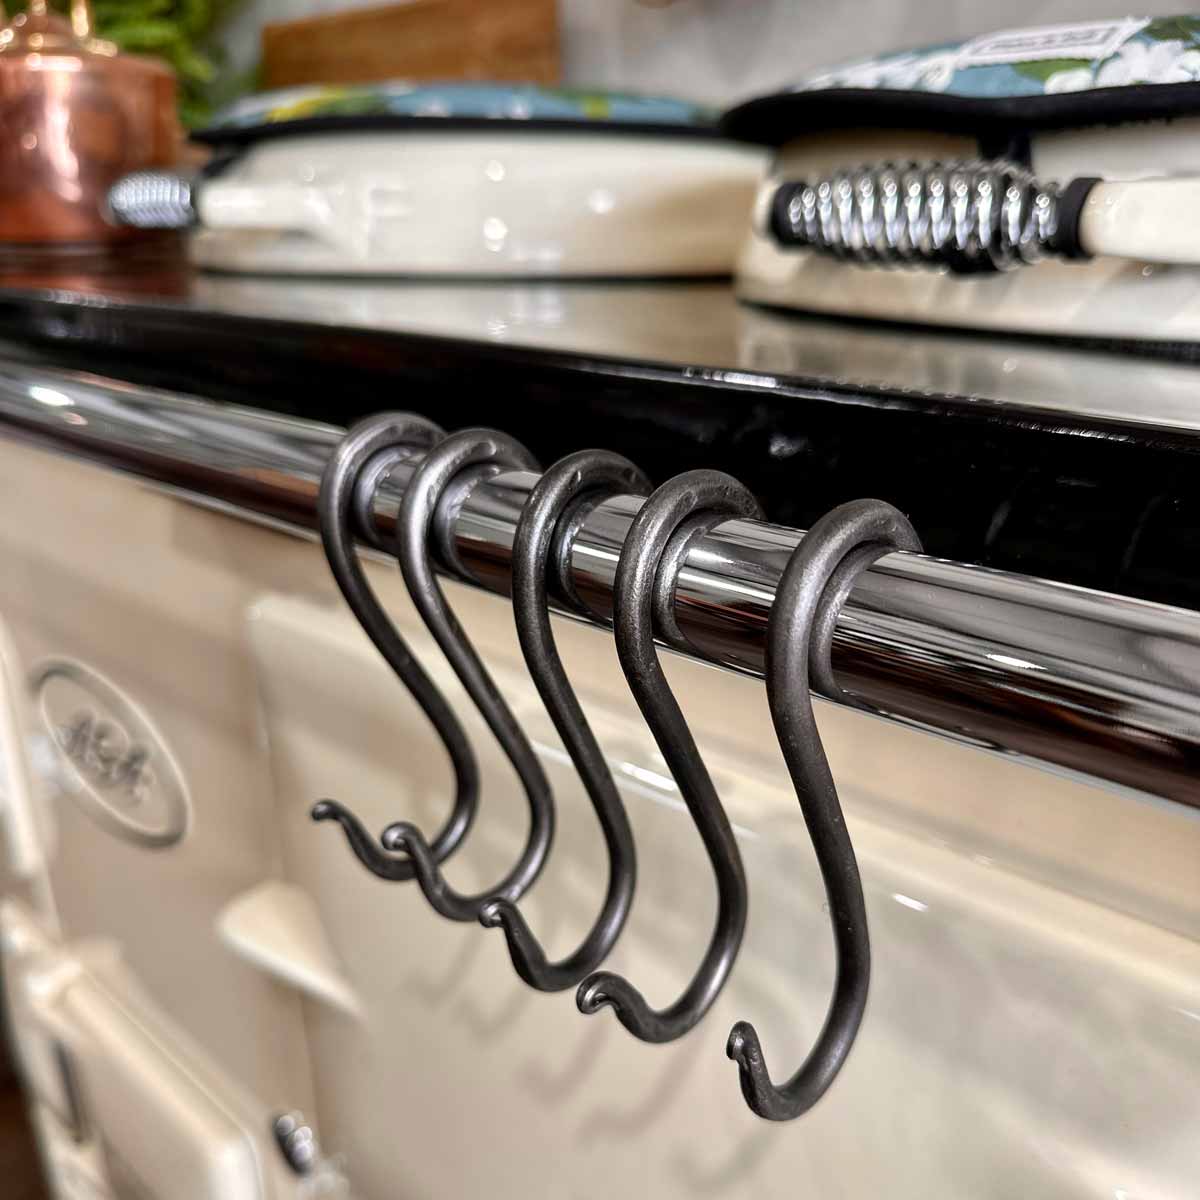 Iron 'S' hanging hook for towel rails on range cookers (set of 5) Steel 'S' hanging hook with curled end